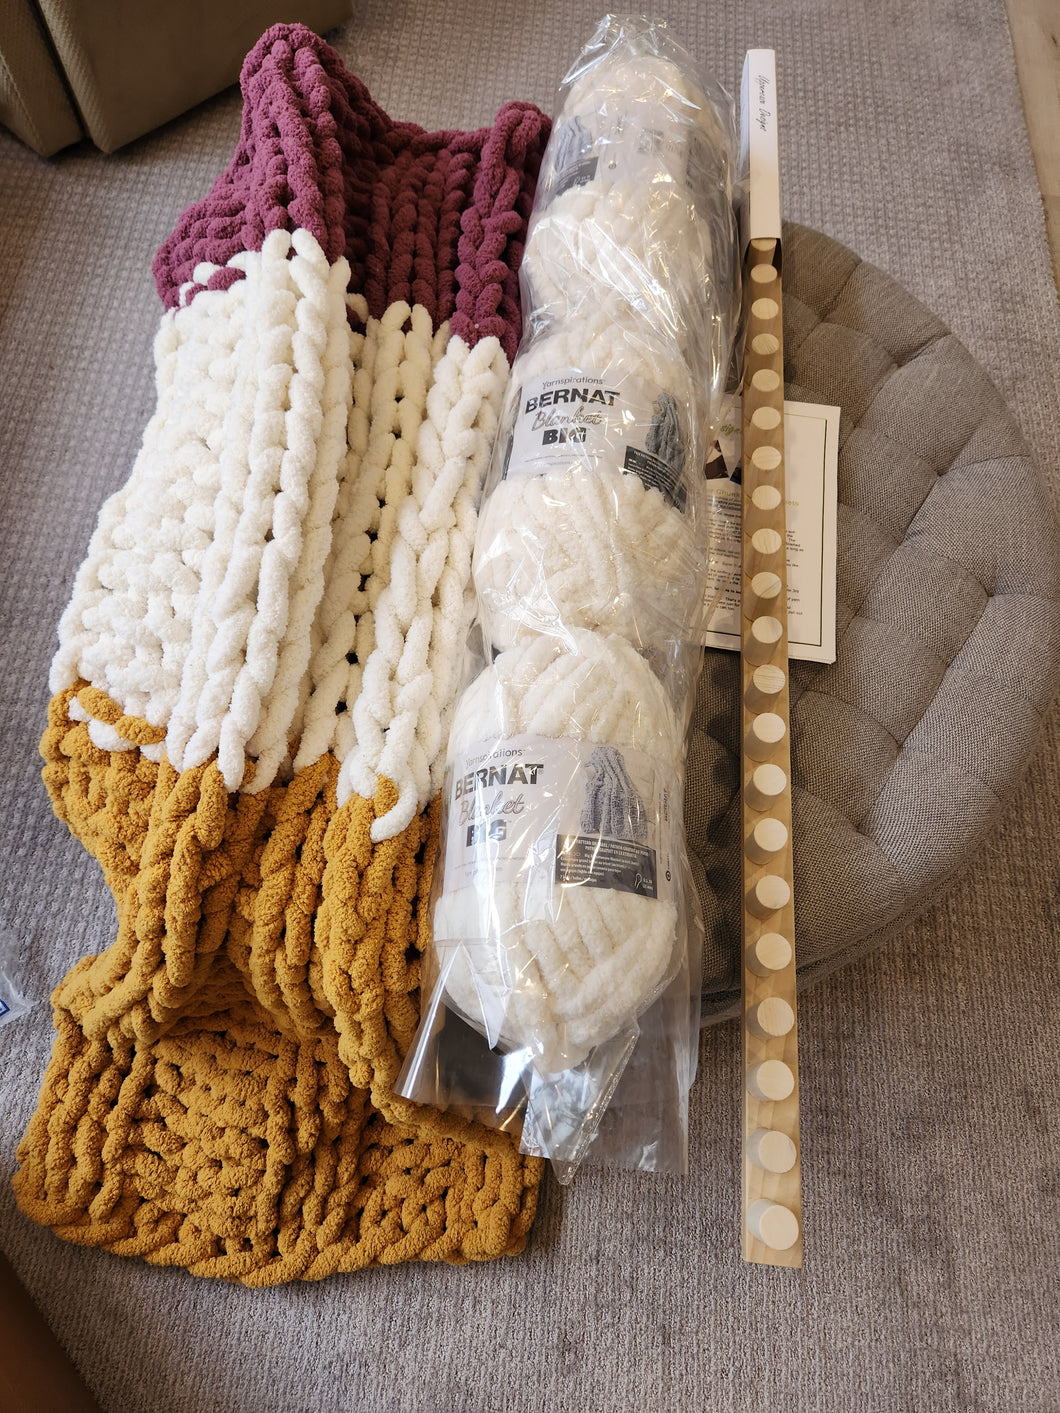 KIT - Standard Size Chunky Blanket Loom- NO EXPERIENCE - Beginner Level - Uppercase Designs in Wood - 1-888-860-7735